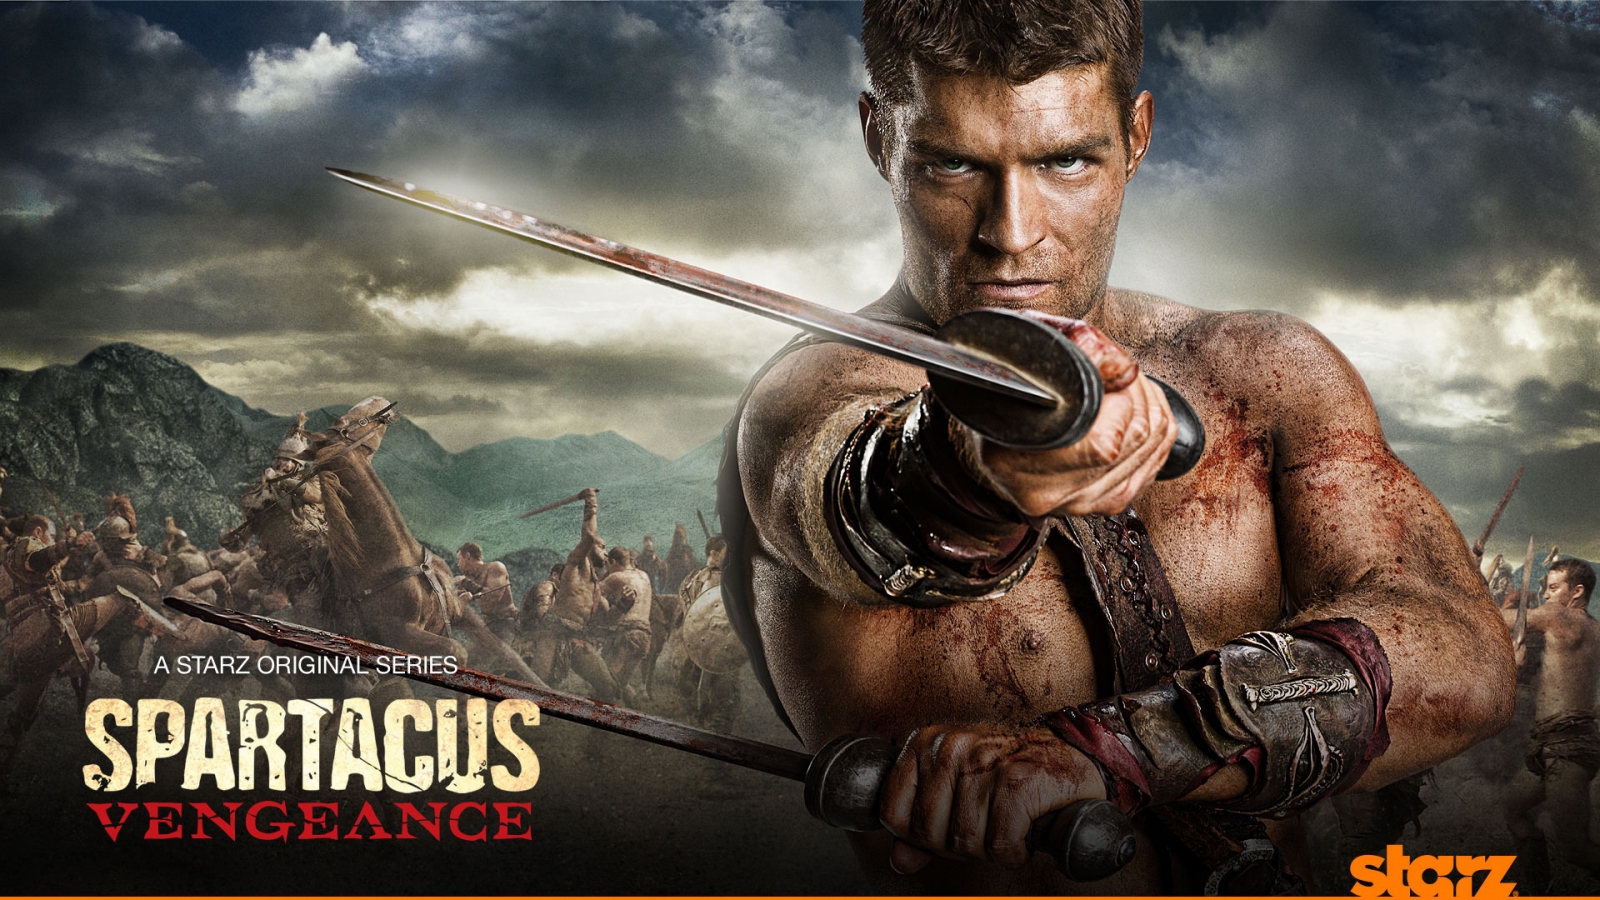 Tv Show Spartacus Vengeance for 1600 x 900 HDTV resolution